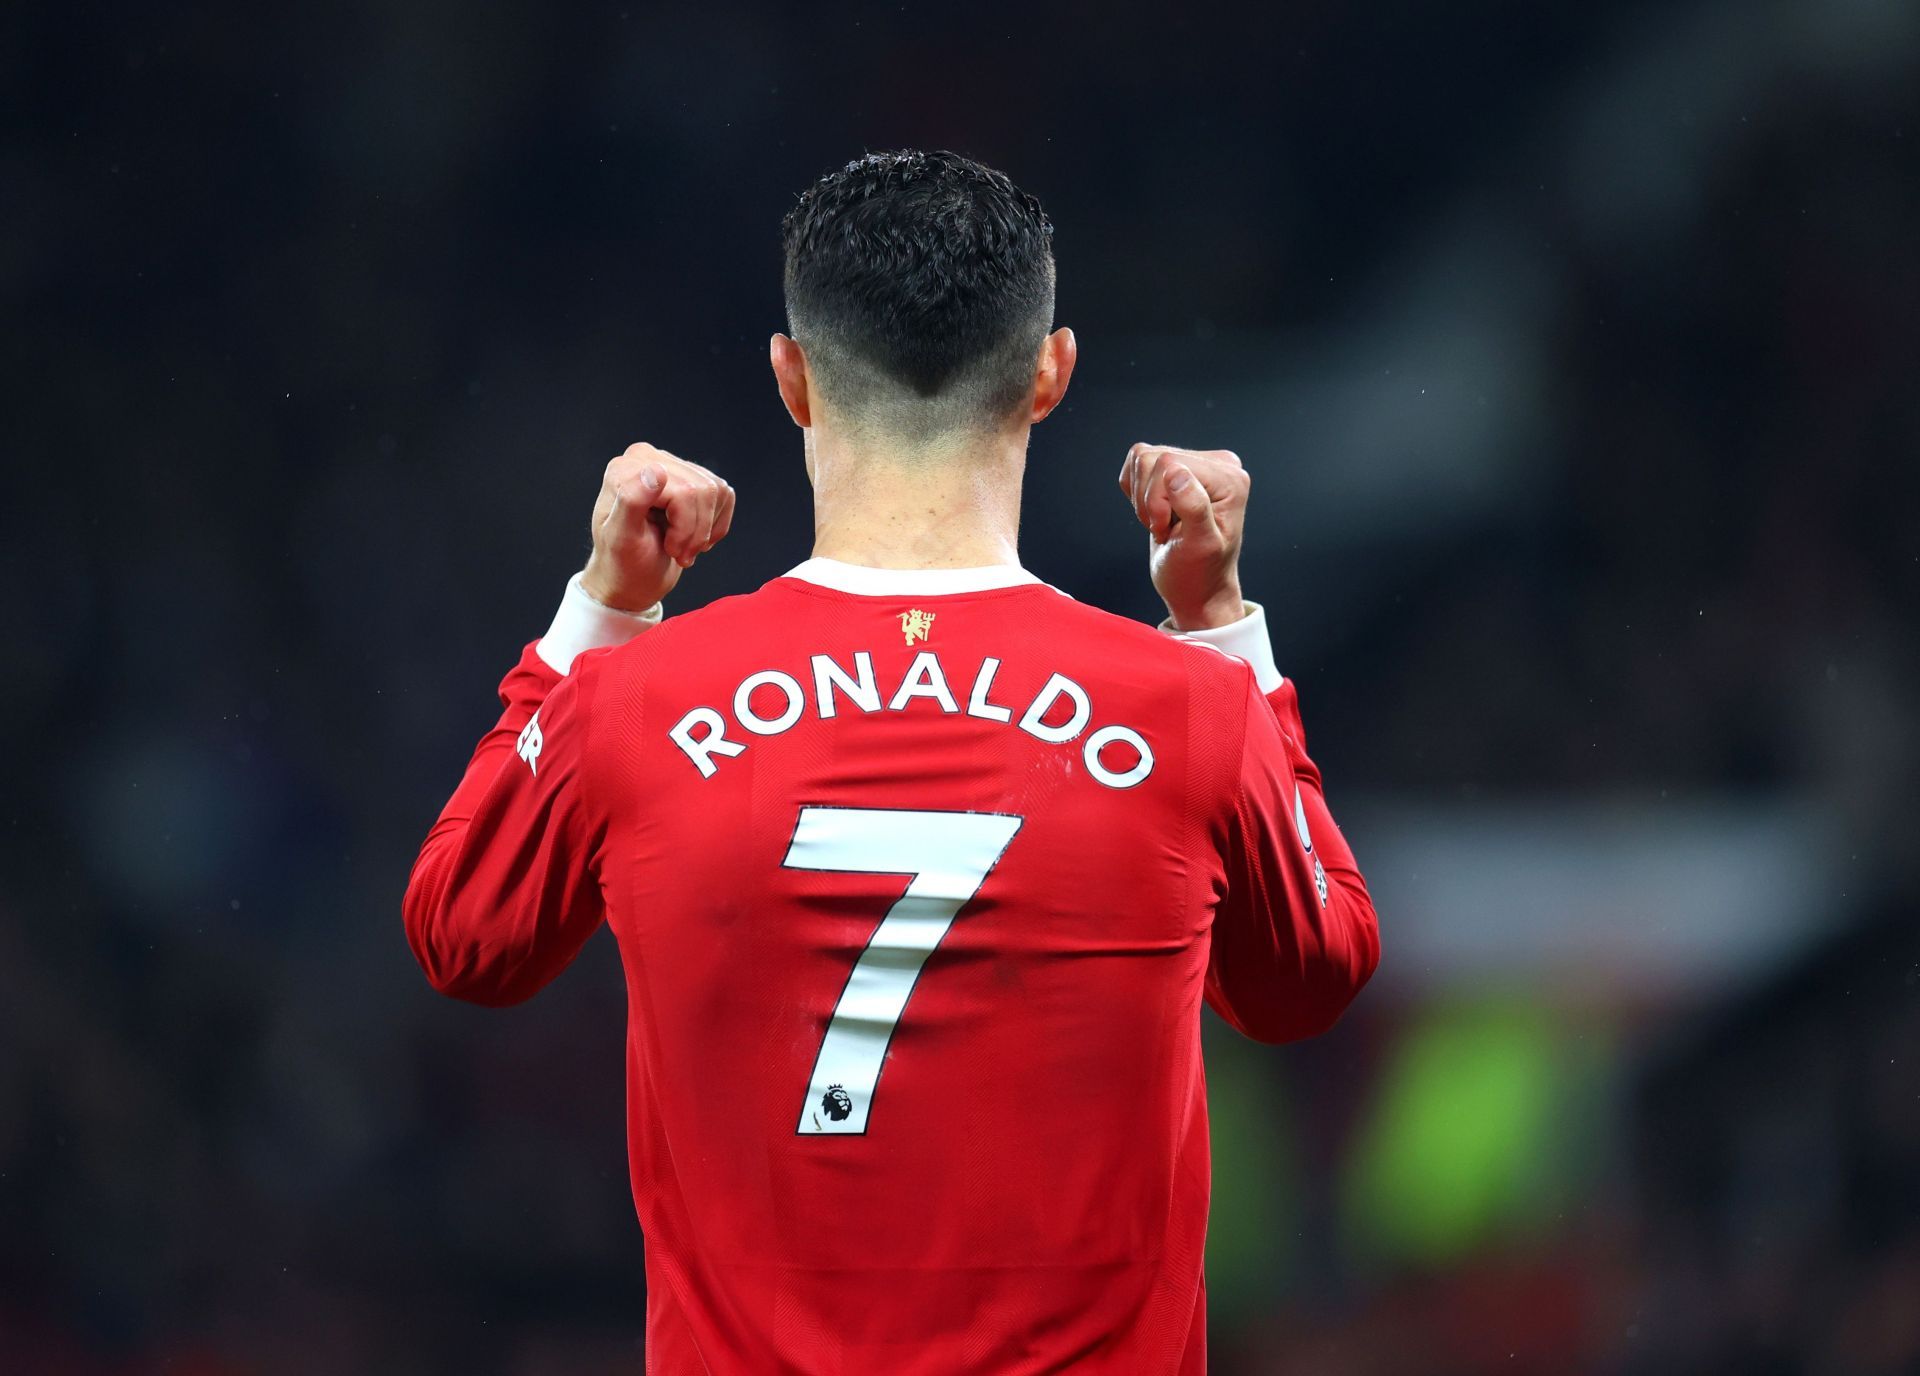 Cristiano Ronaldo has been one positive for Manchester United this season